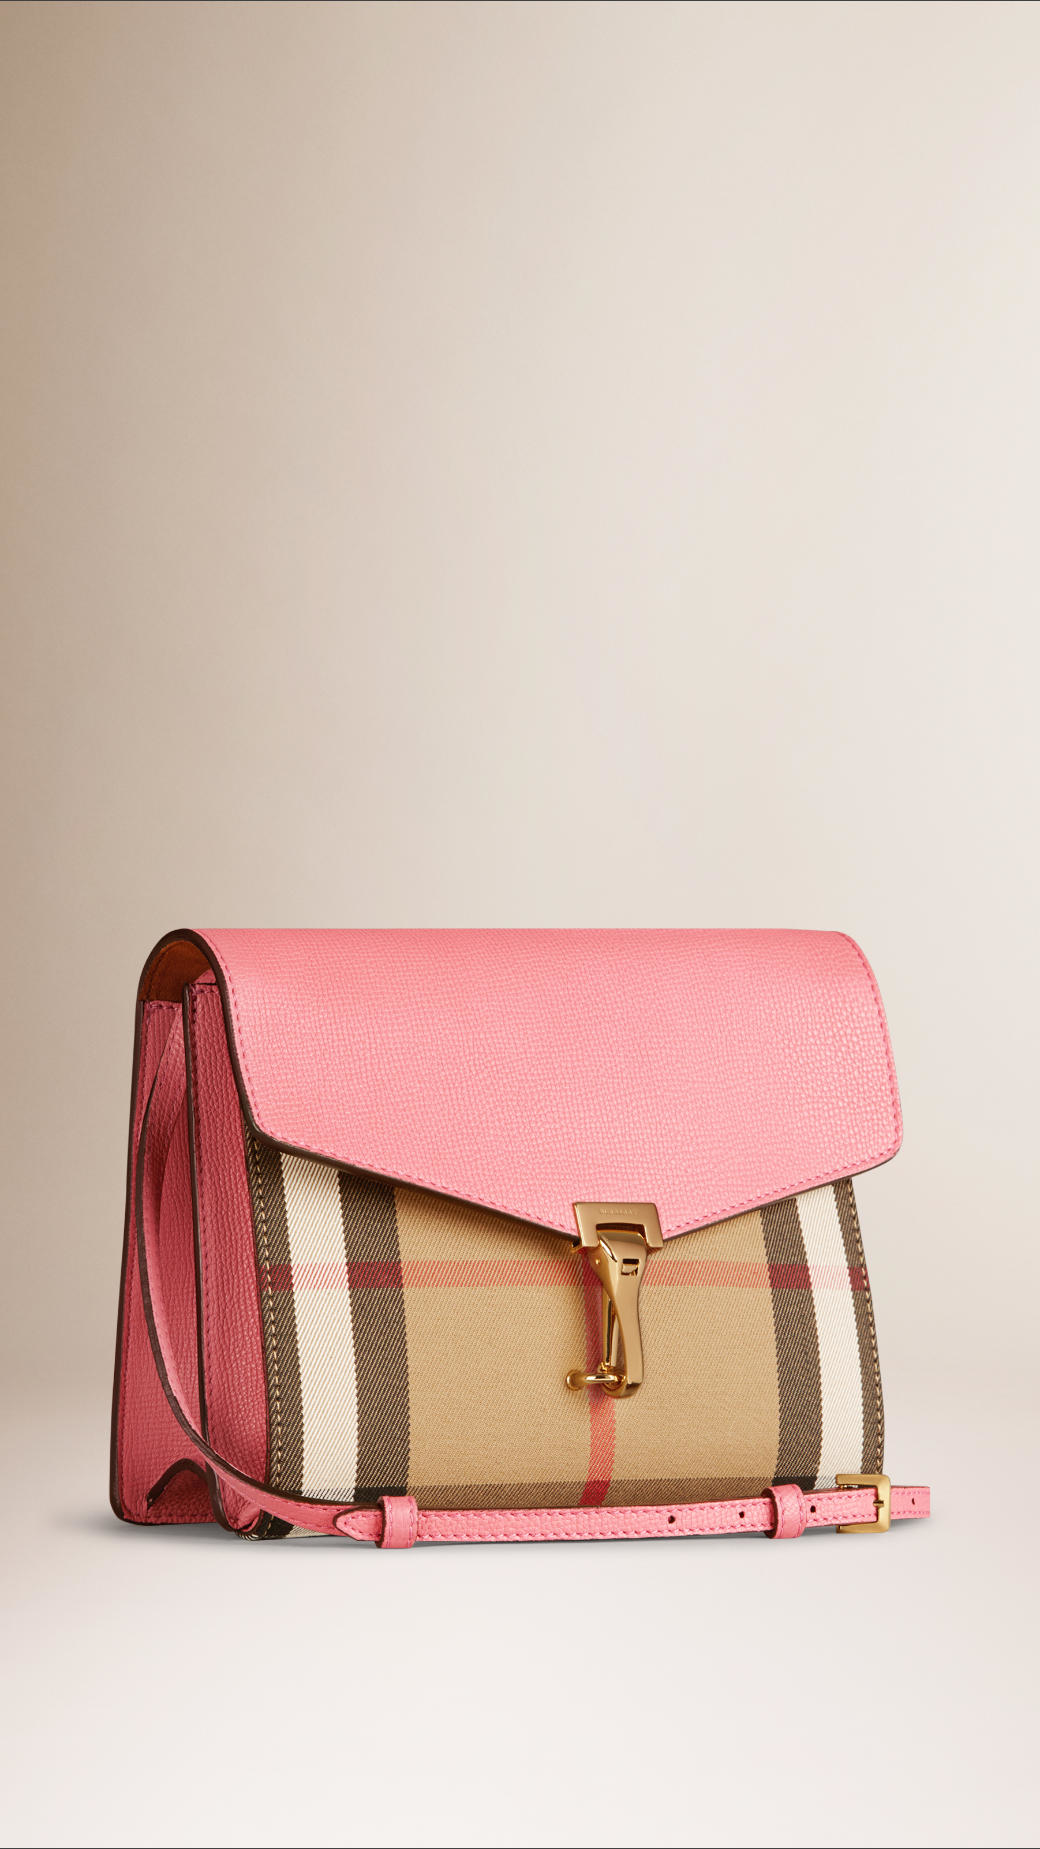 Lyst - Burberry Small House Check and Leather Cross-Body Bag in Pink